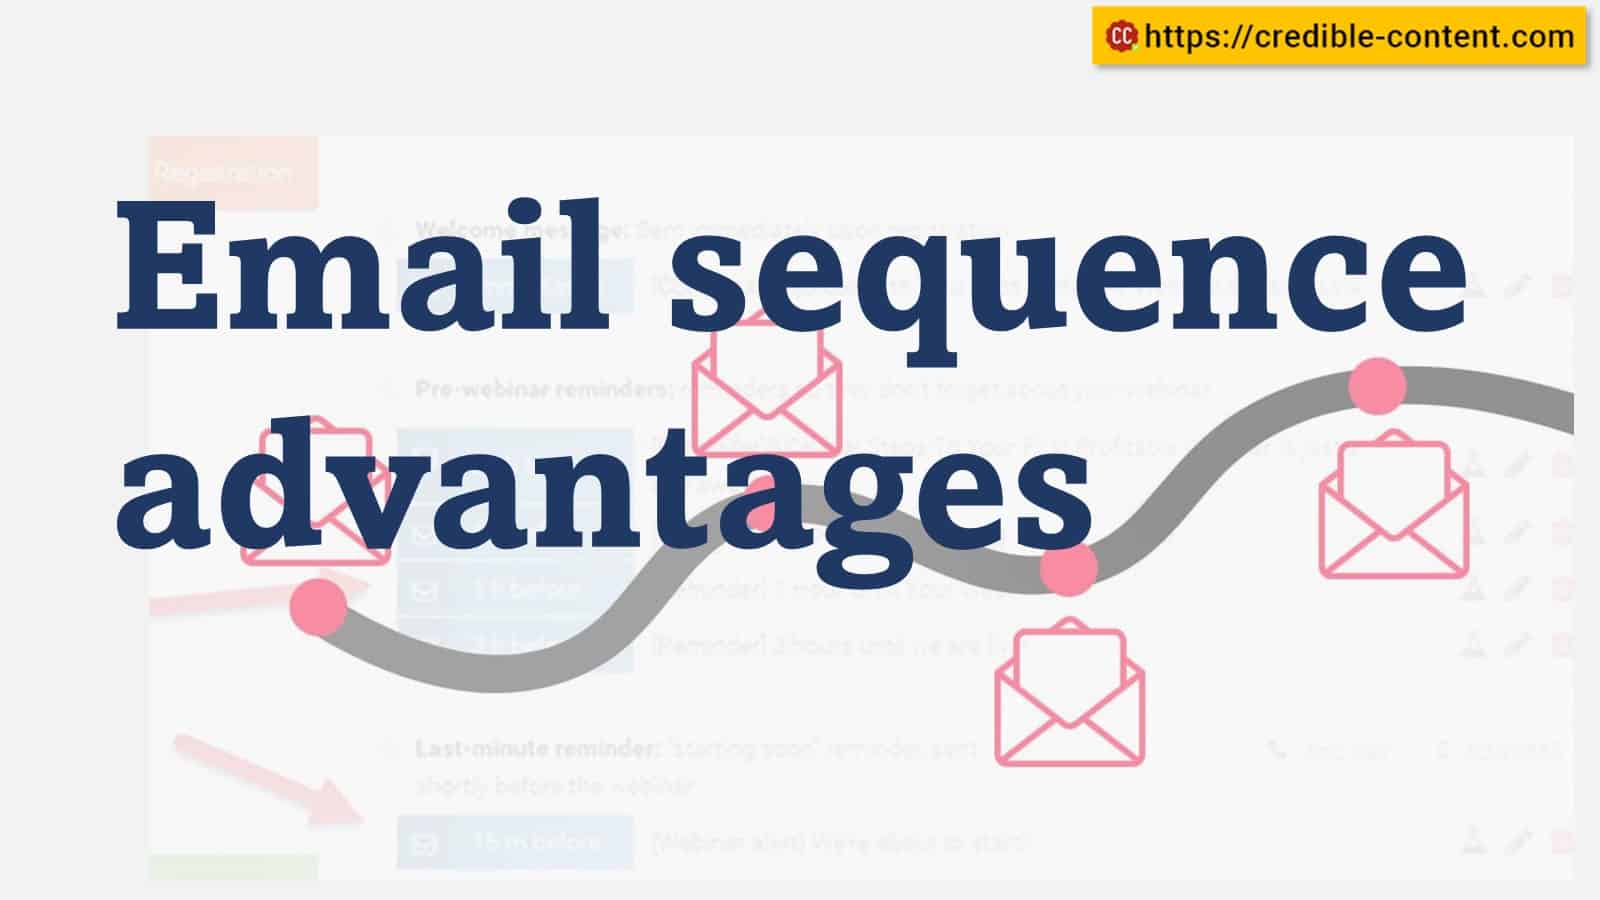 Email sequence advantages